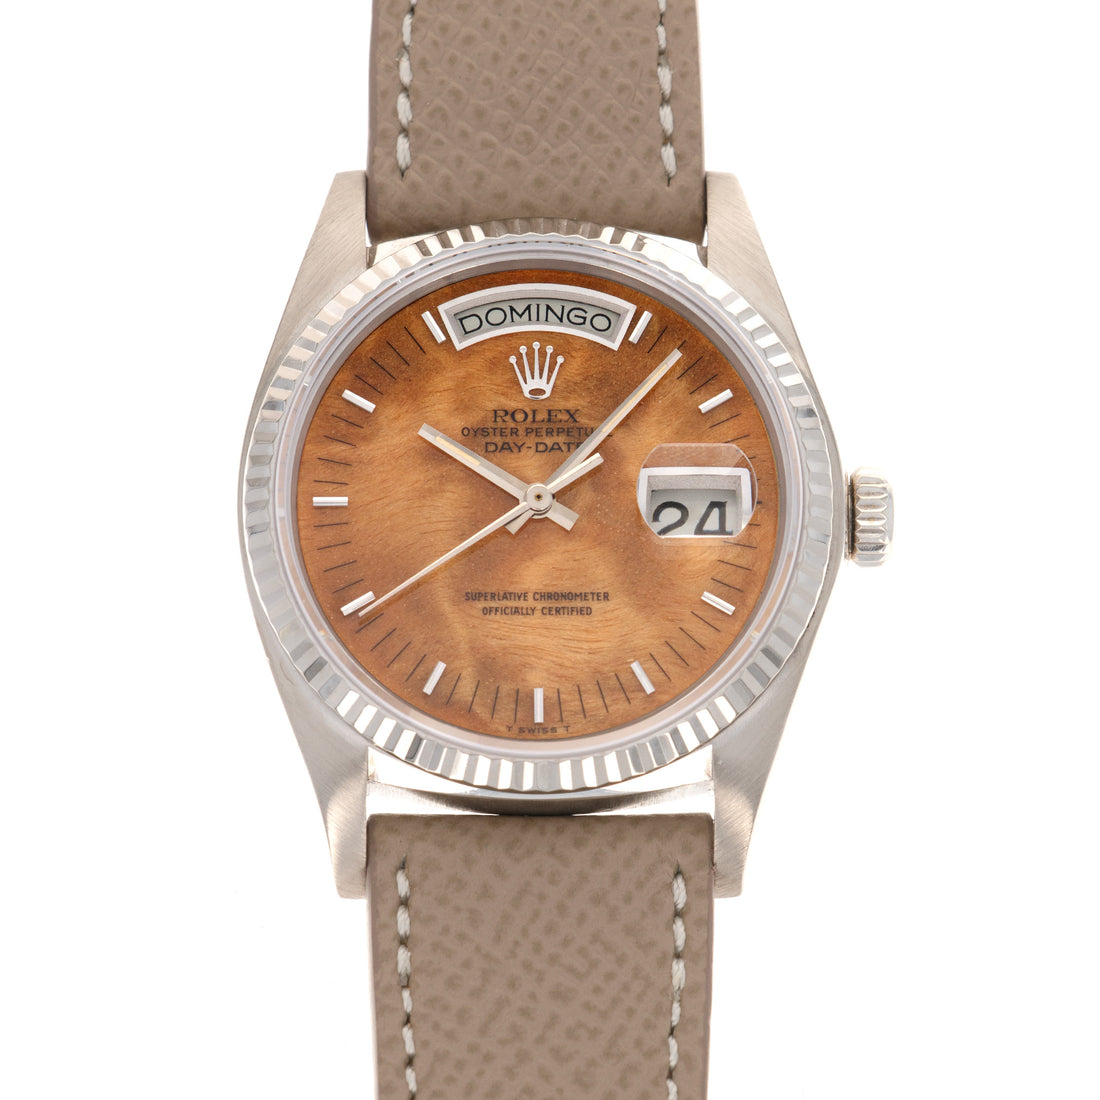 Rolex White Gold Day-Date Wood Dial Watch Ref. 18039